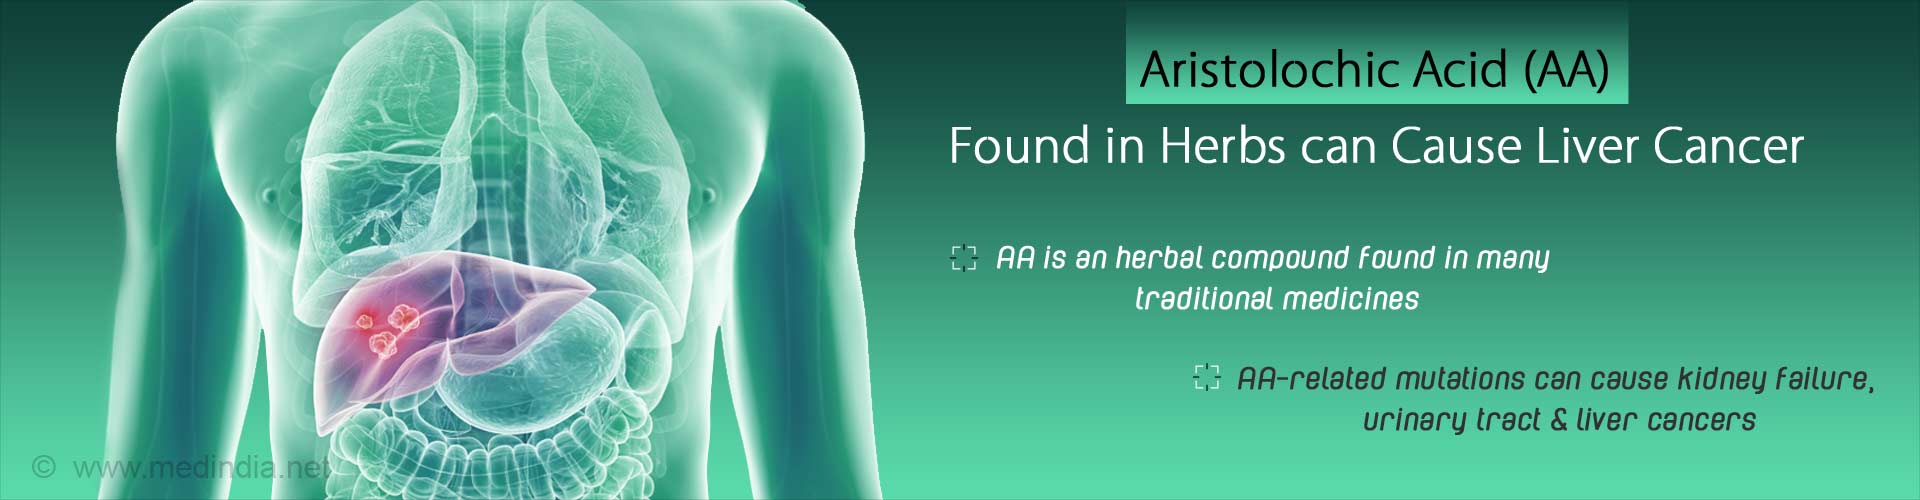 Aristolochic Acid (AA) found in herbs can cause liver cancer
- AA is an herbal compound found in many traditional medicines
- AA-related mutations can cause kidney failure, urinary tract and liver cancers